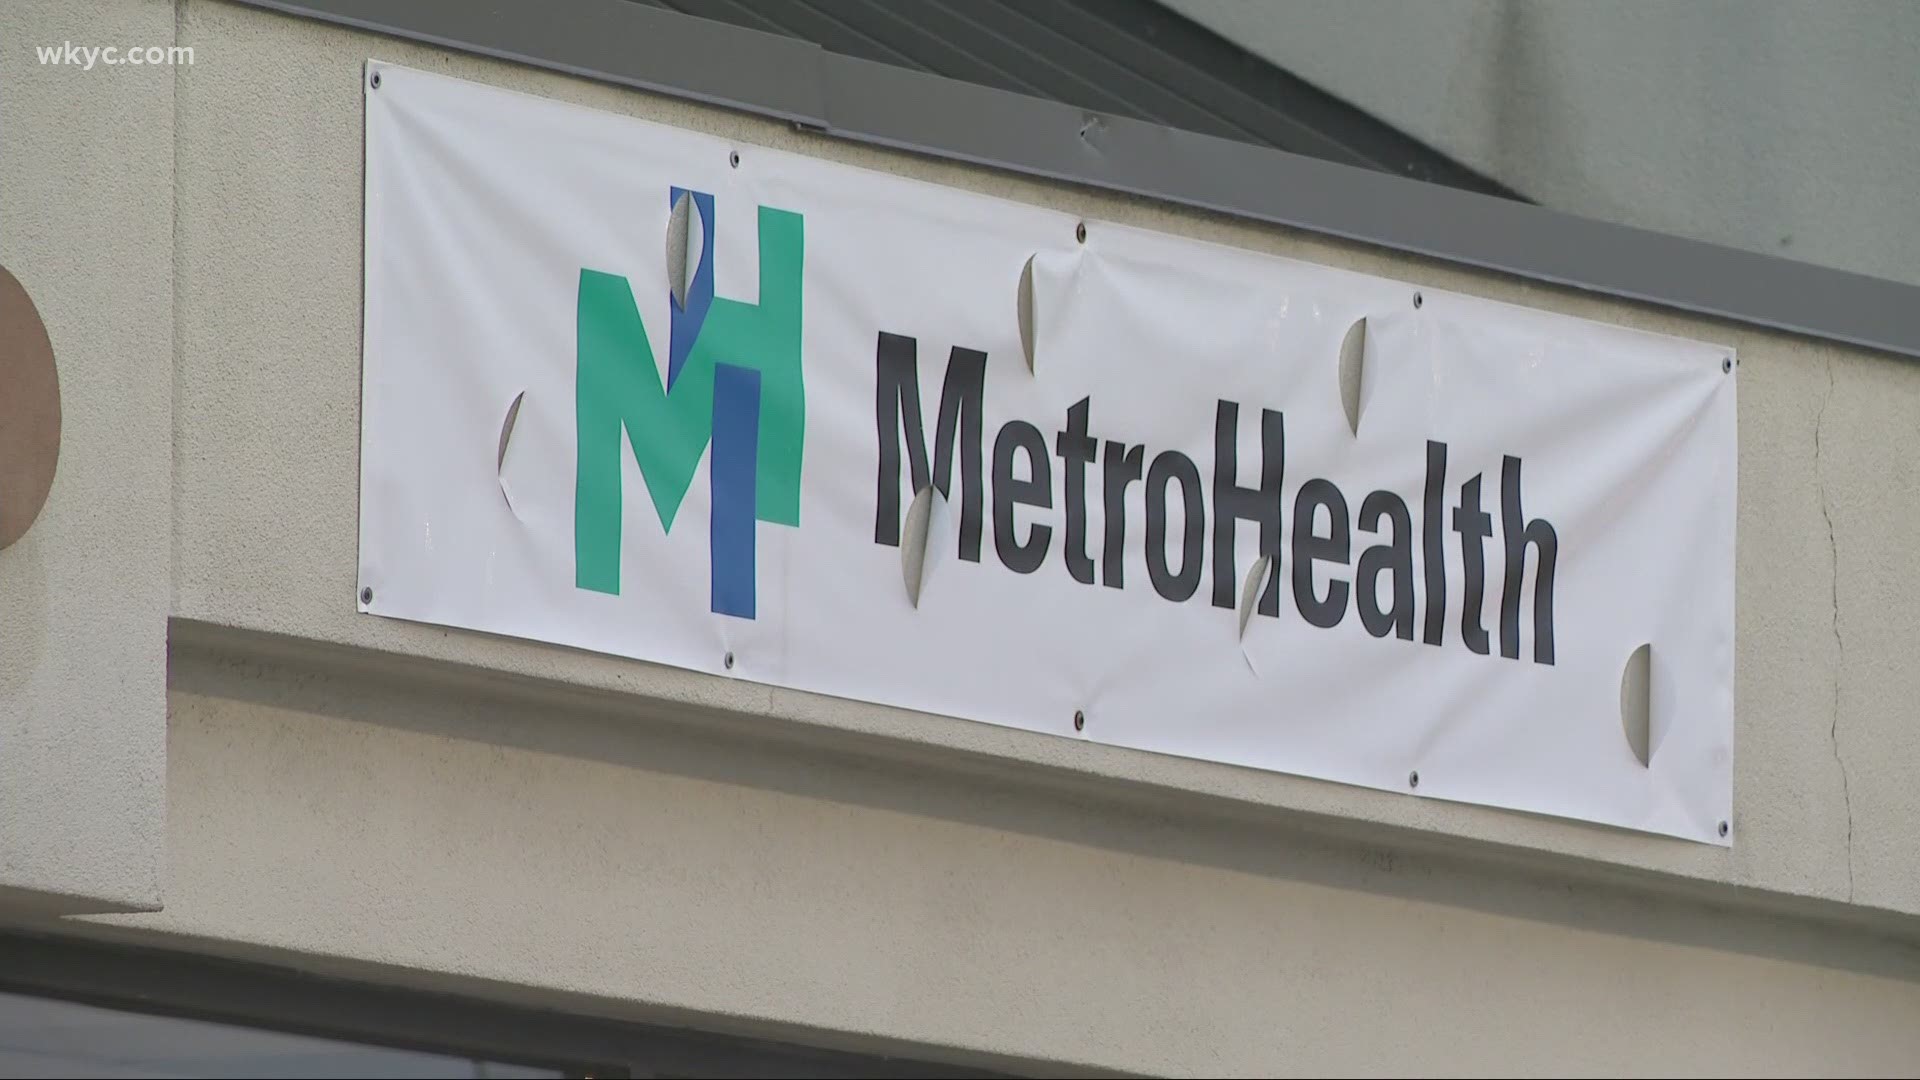 Appointments are now being taken for the MetroHealth site, located at 5398 Northfield Road in Maple Heights.